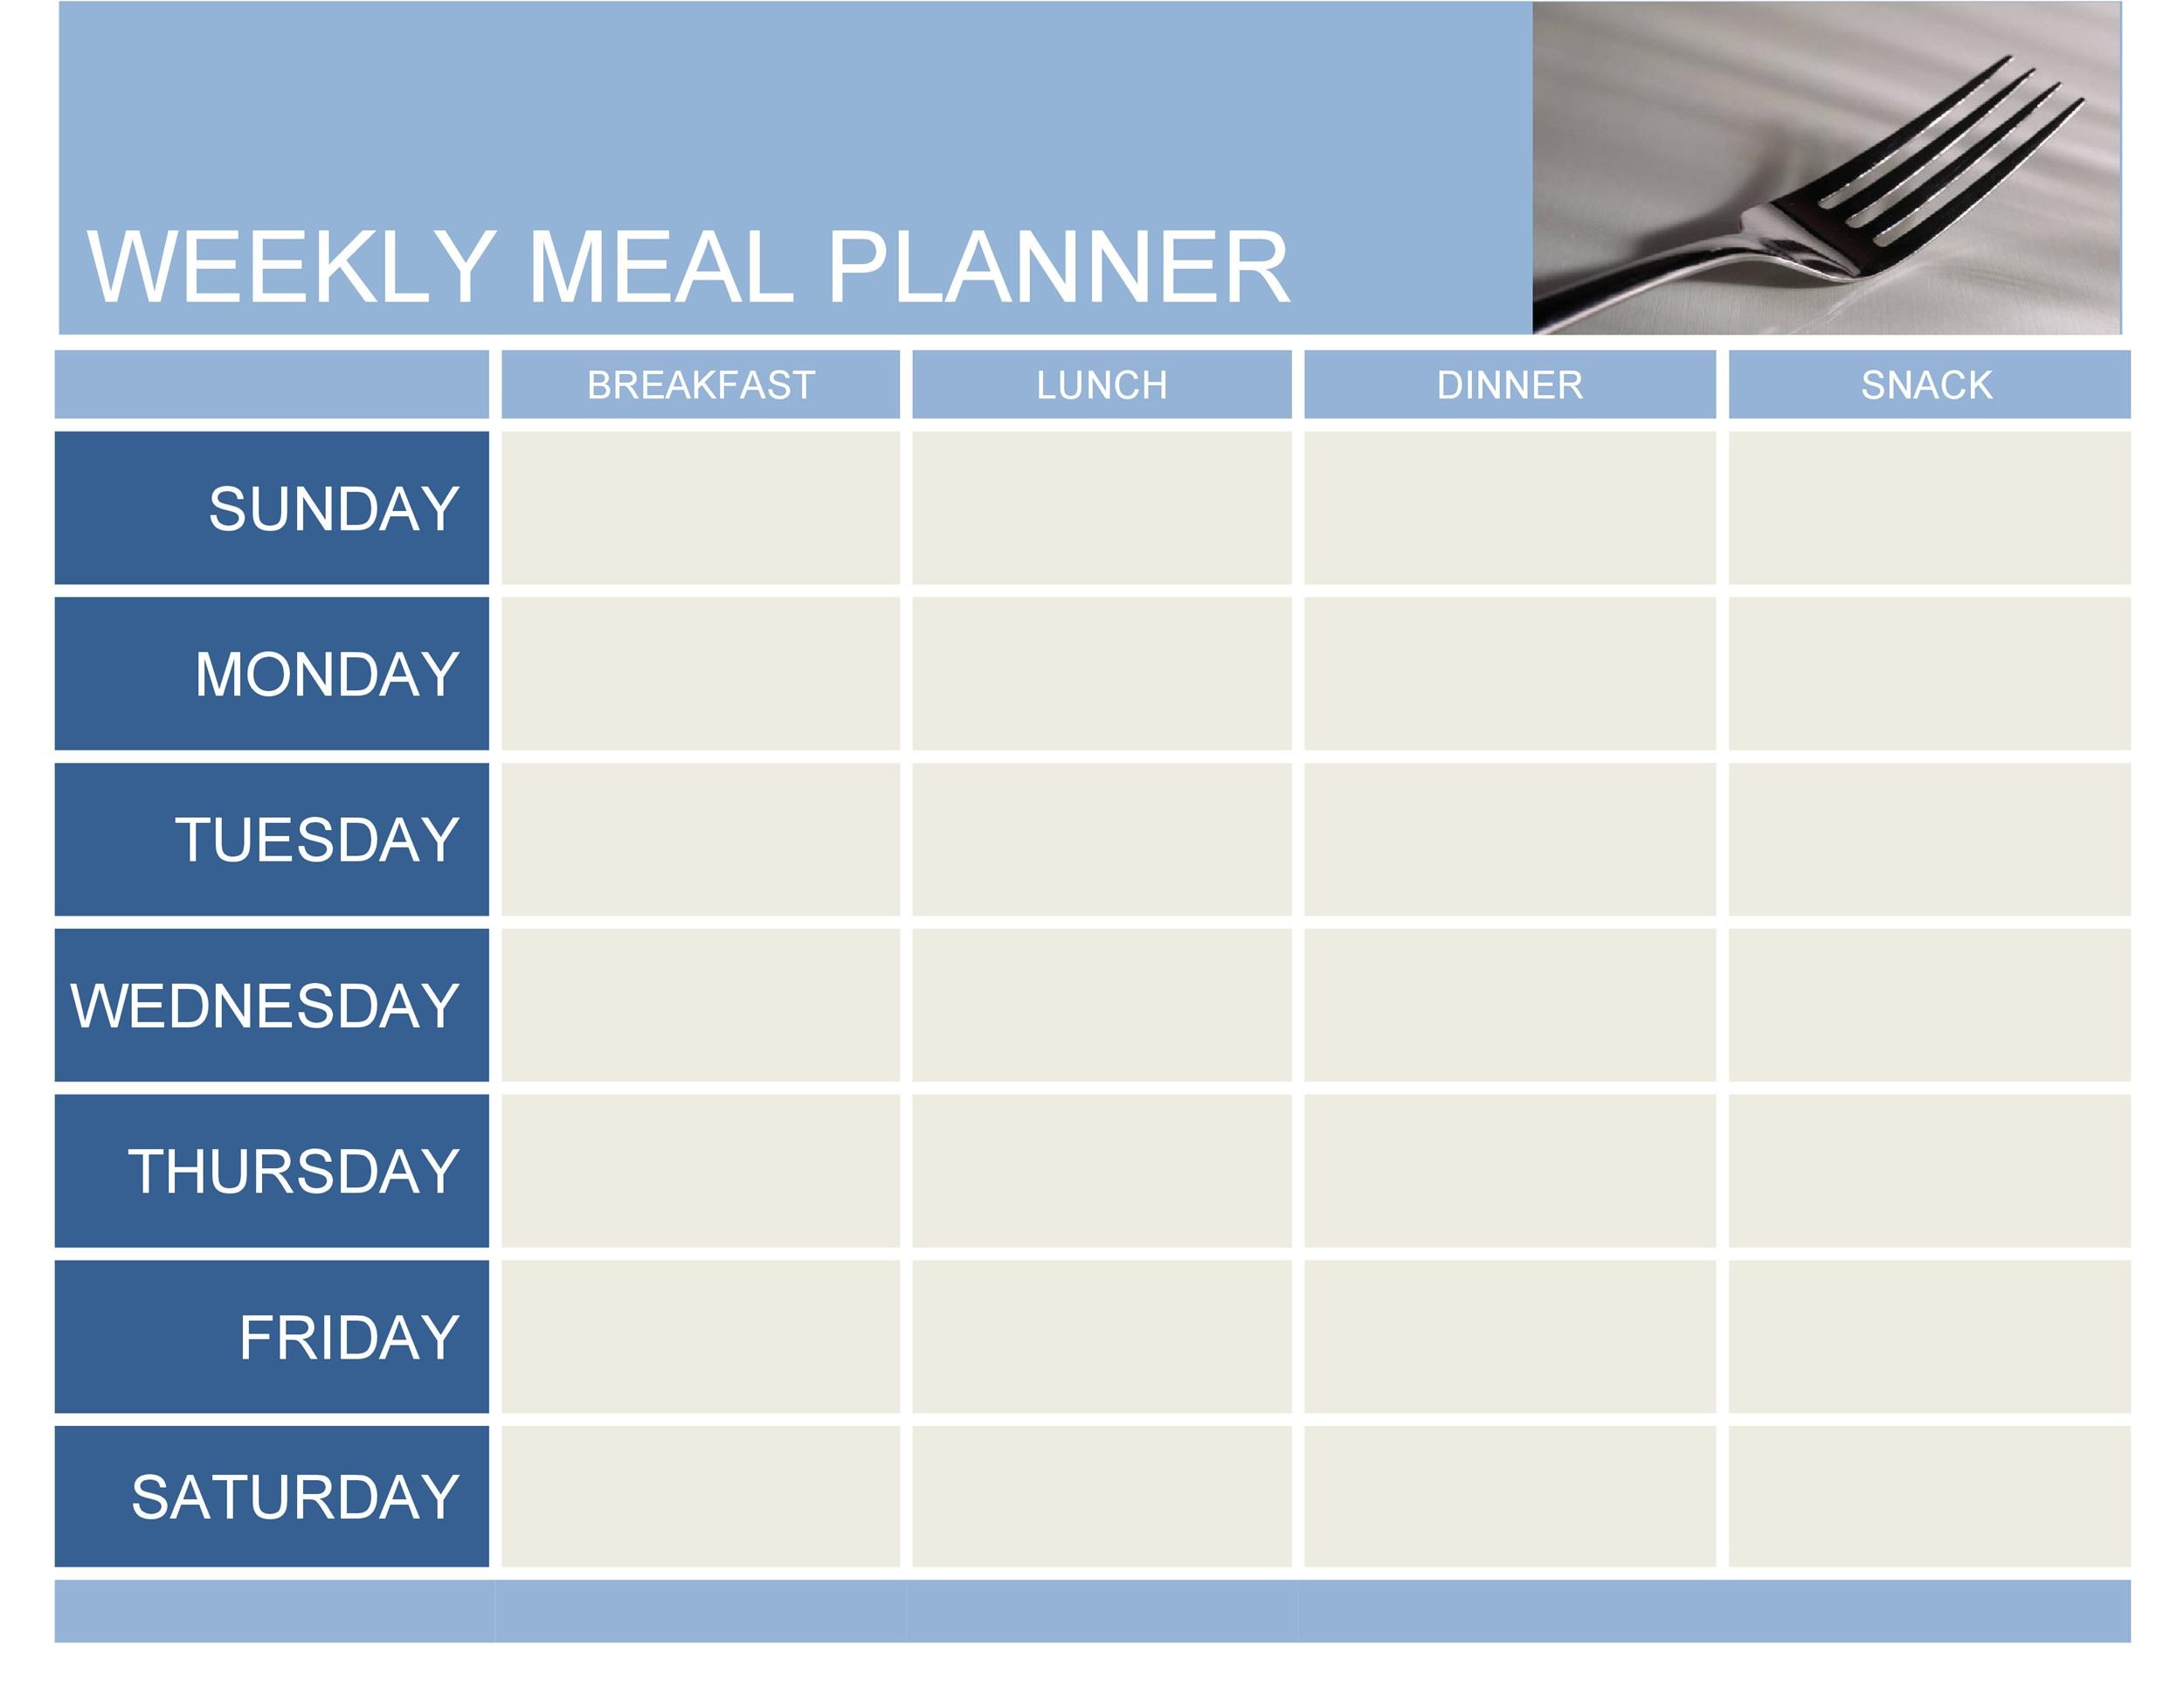 8 Weekly Meal Planner Template Excel Perfect Template Ideas 94105 Hot